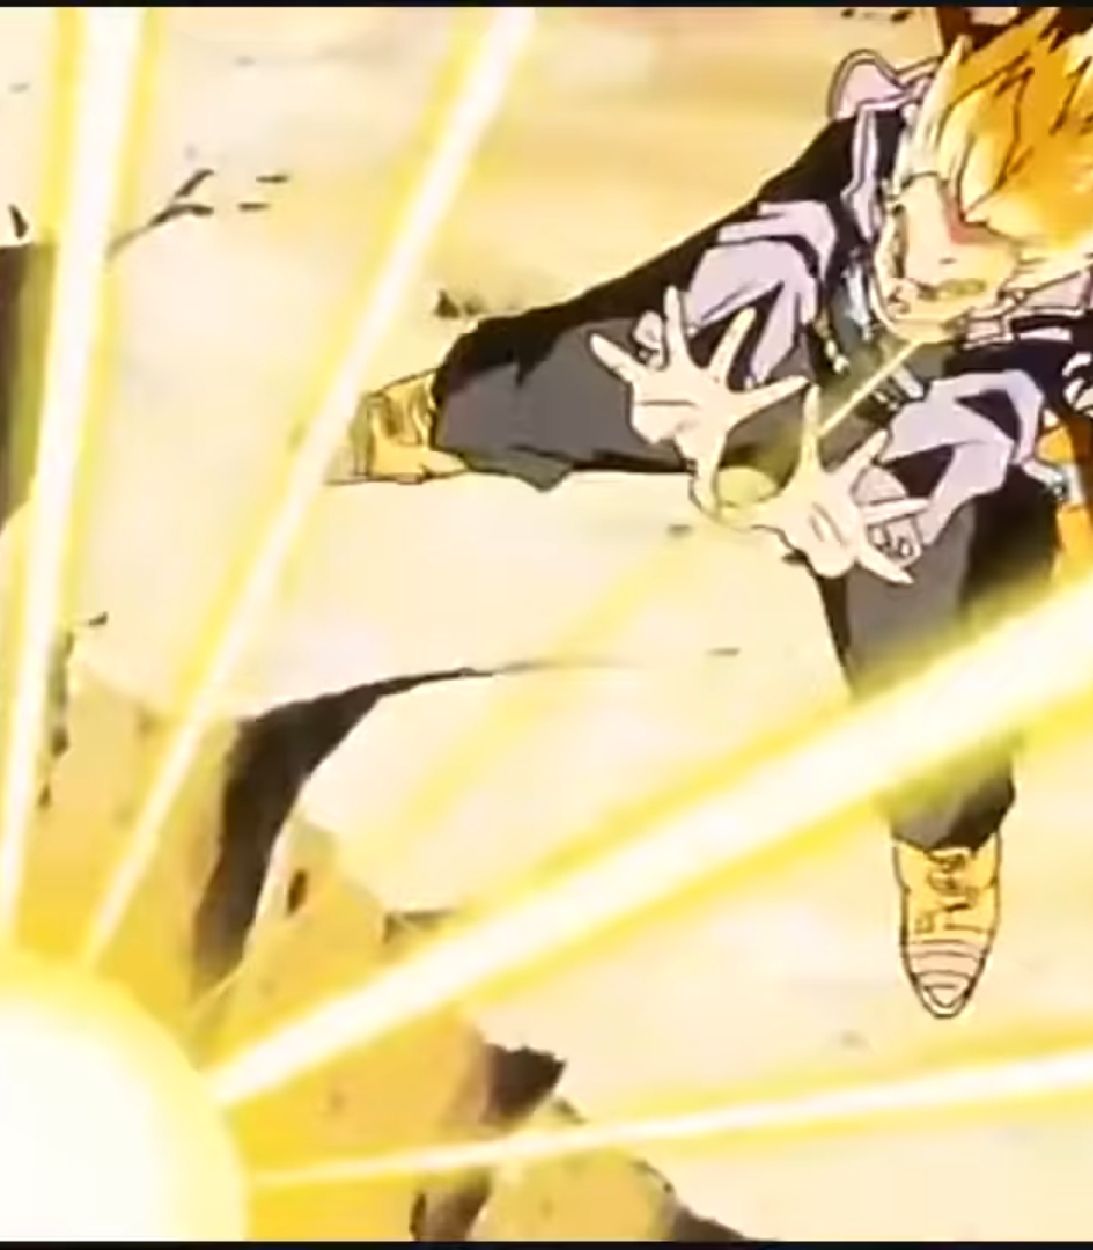 Future Trunks firing the burning attack at Frieza and cooler Dragon Ball Z vertical